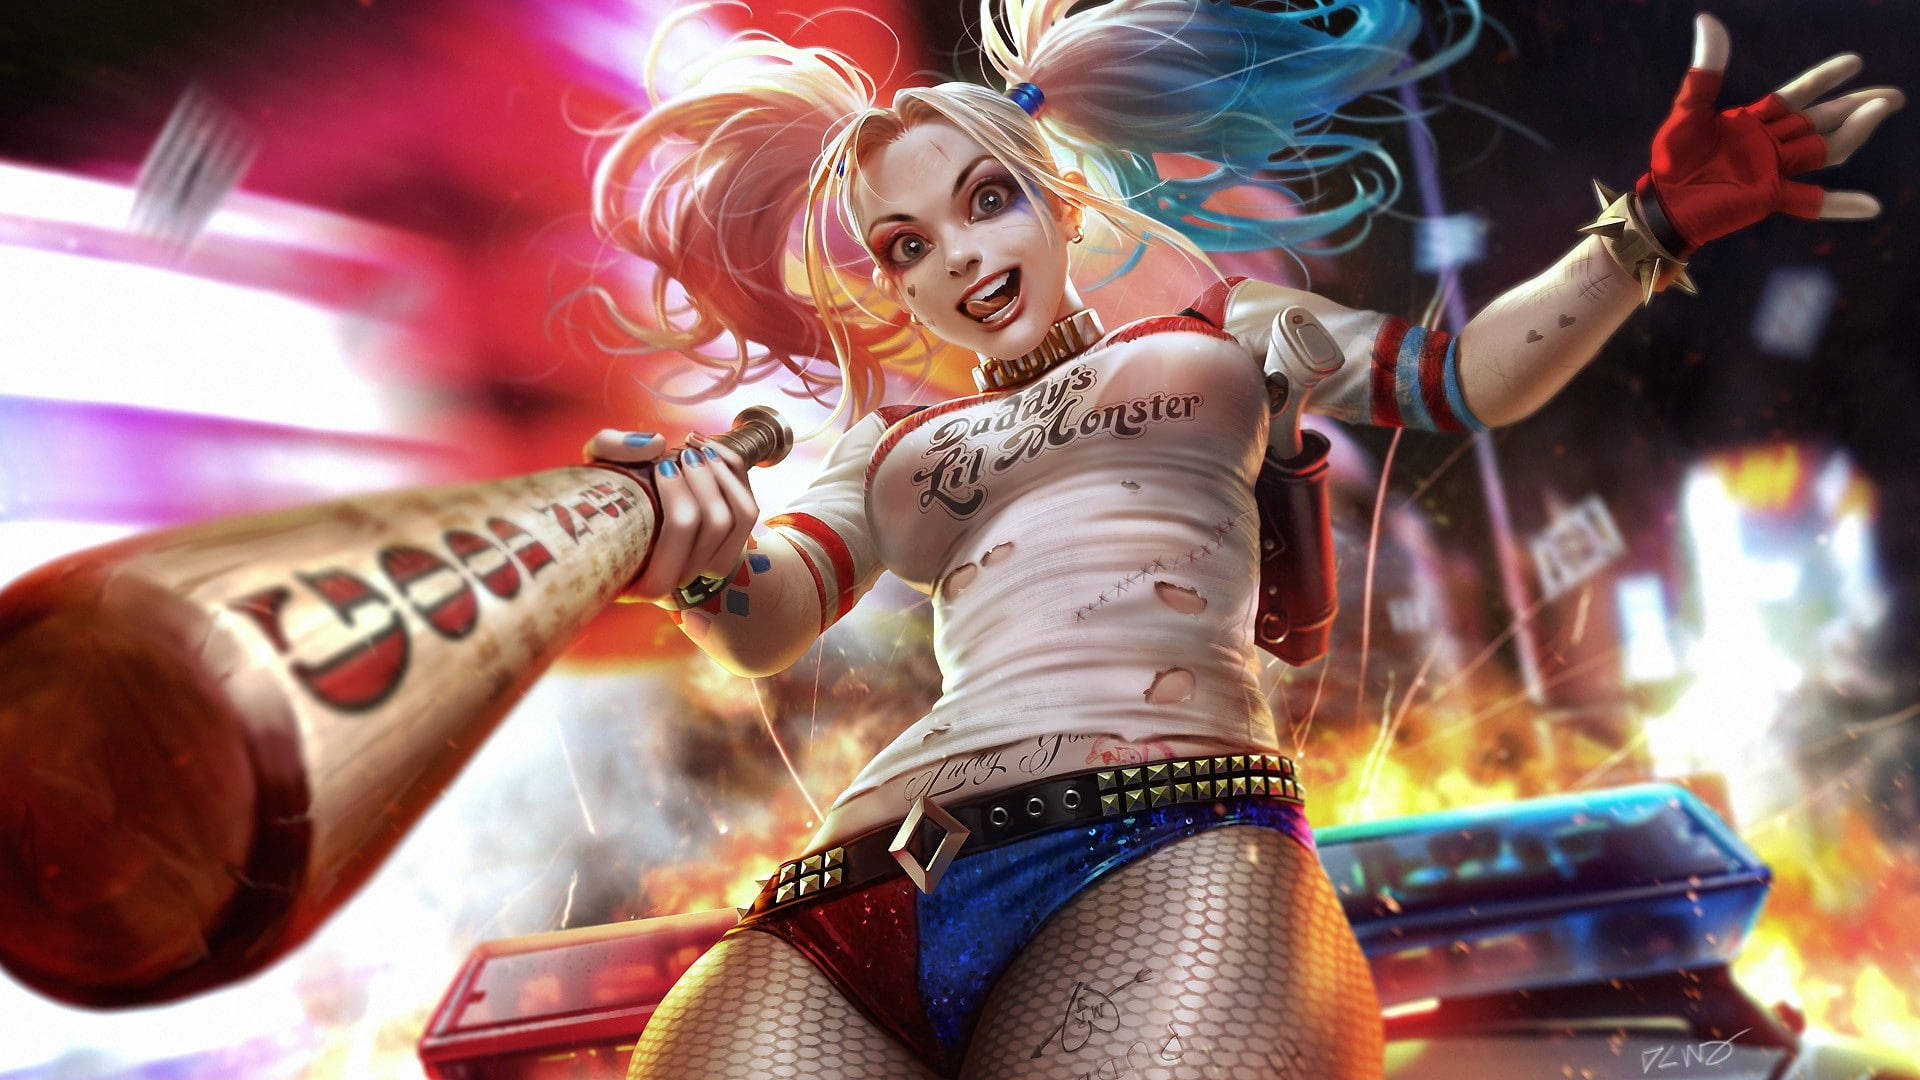 "Mere Anarchy: Harley Quinn in the Suicide Squad" Wallpaper